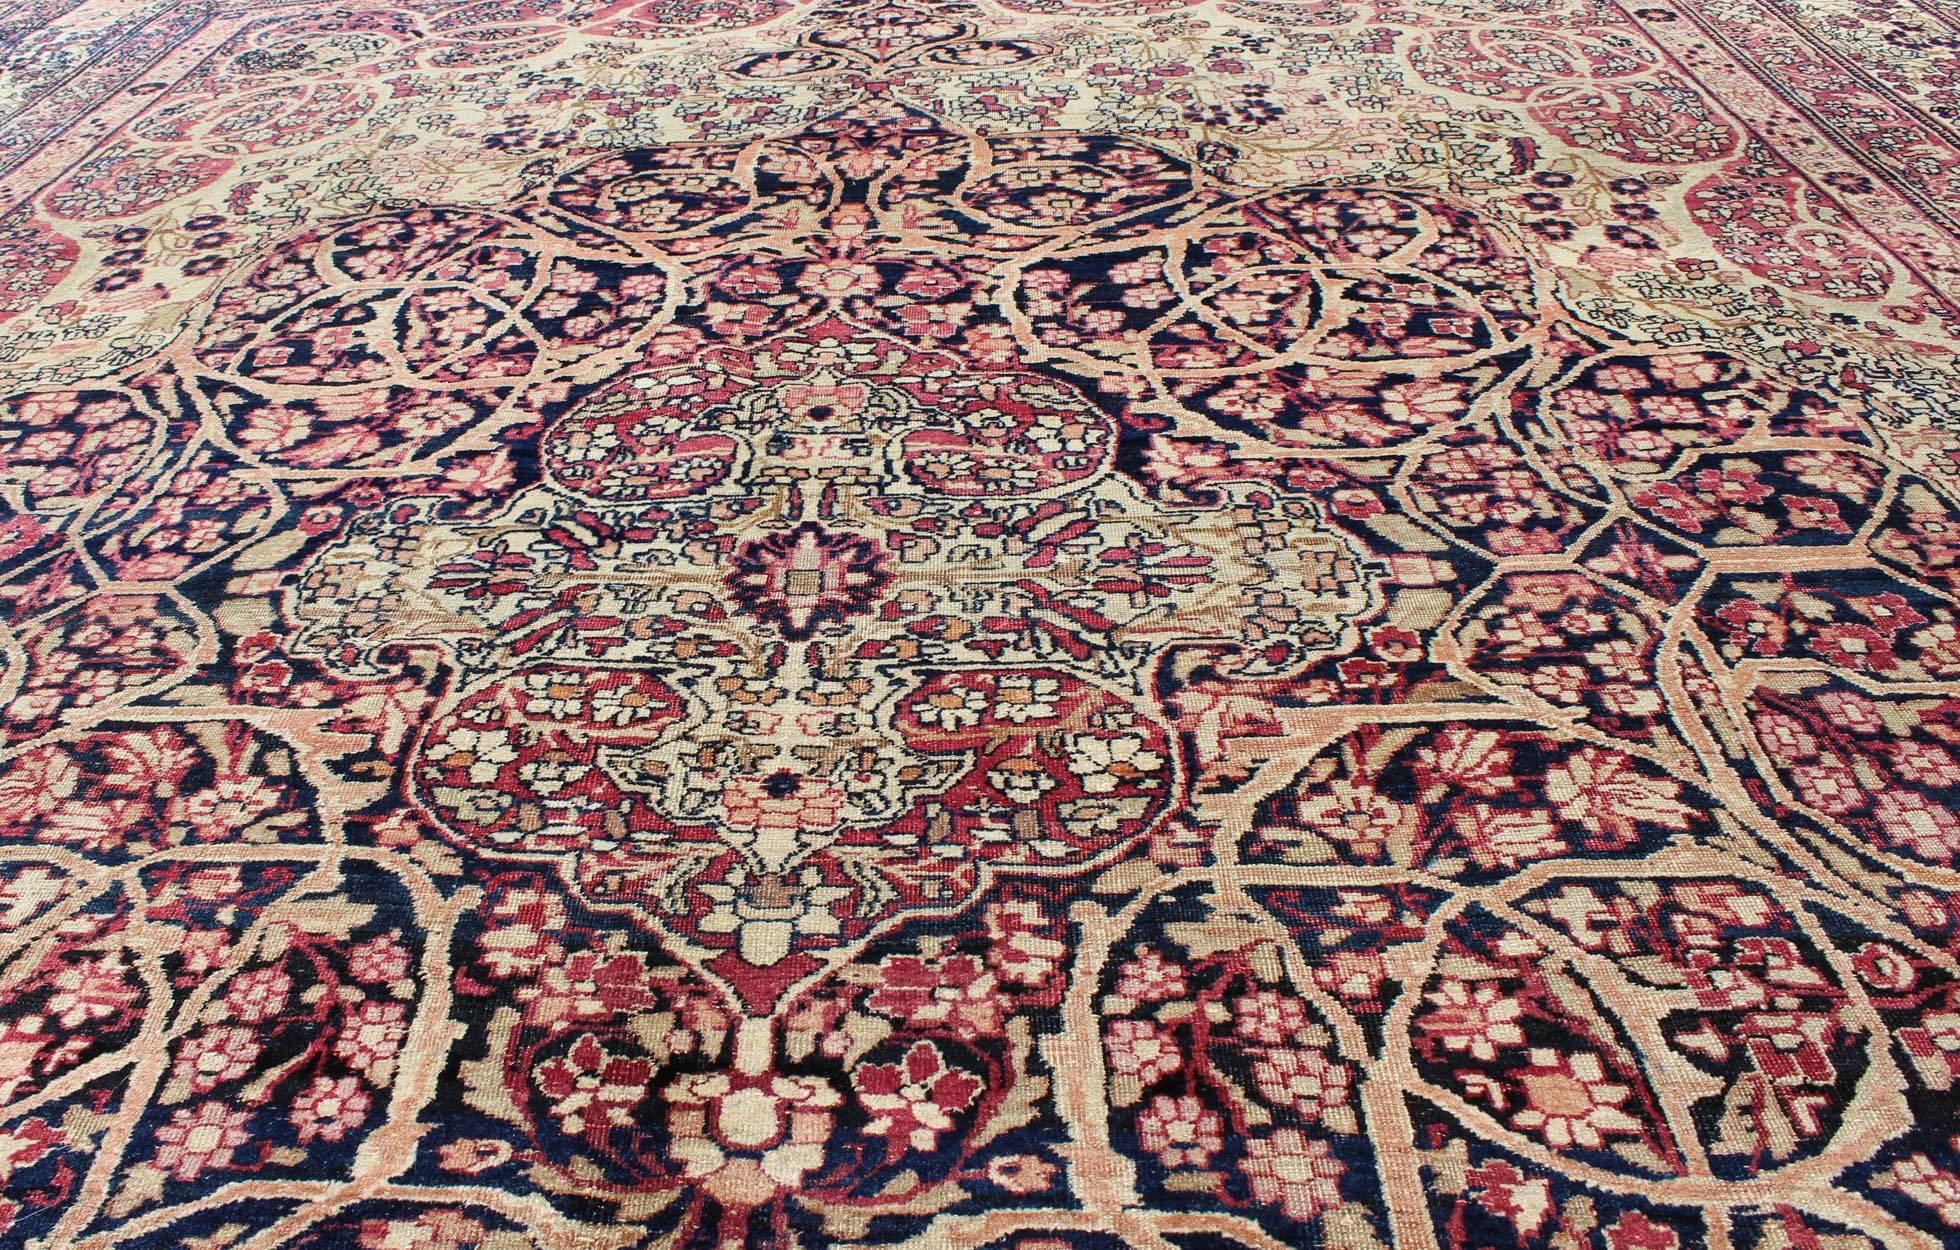 Late 19th Century Antique Persian Lavar Kerman Rug with Large Medallion and intricate design